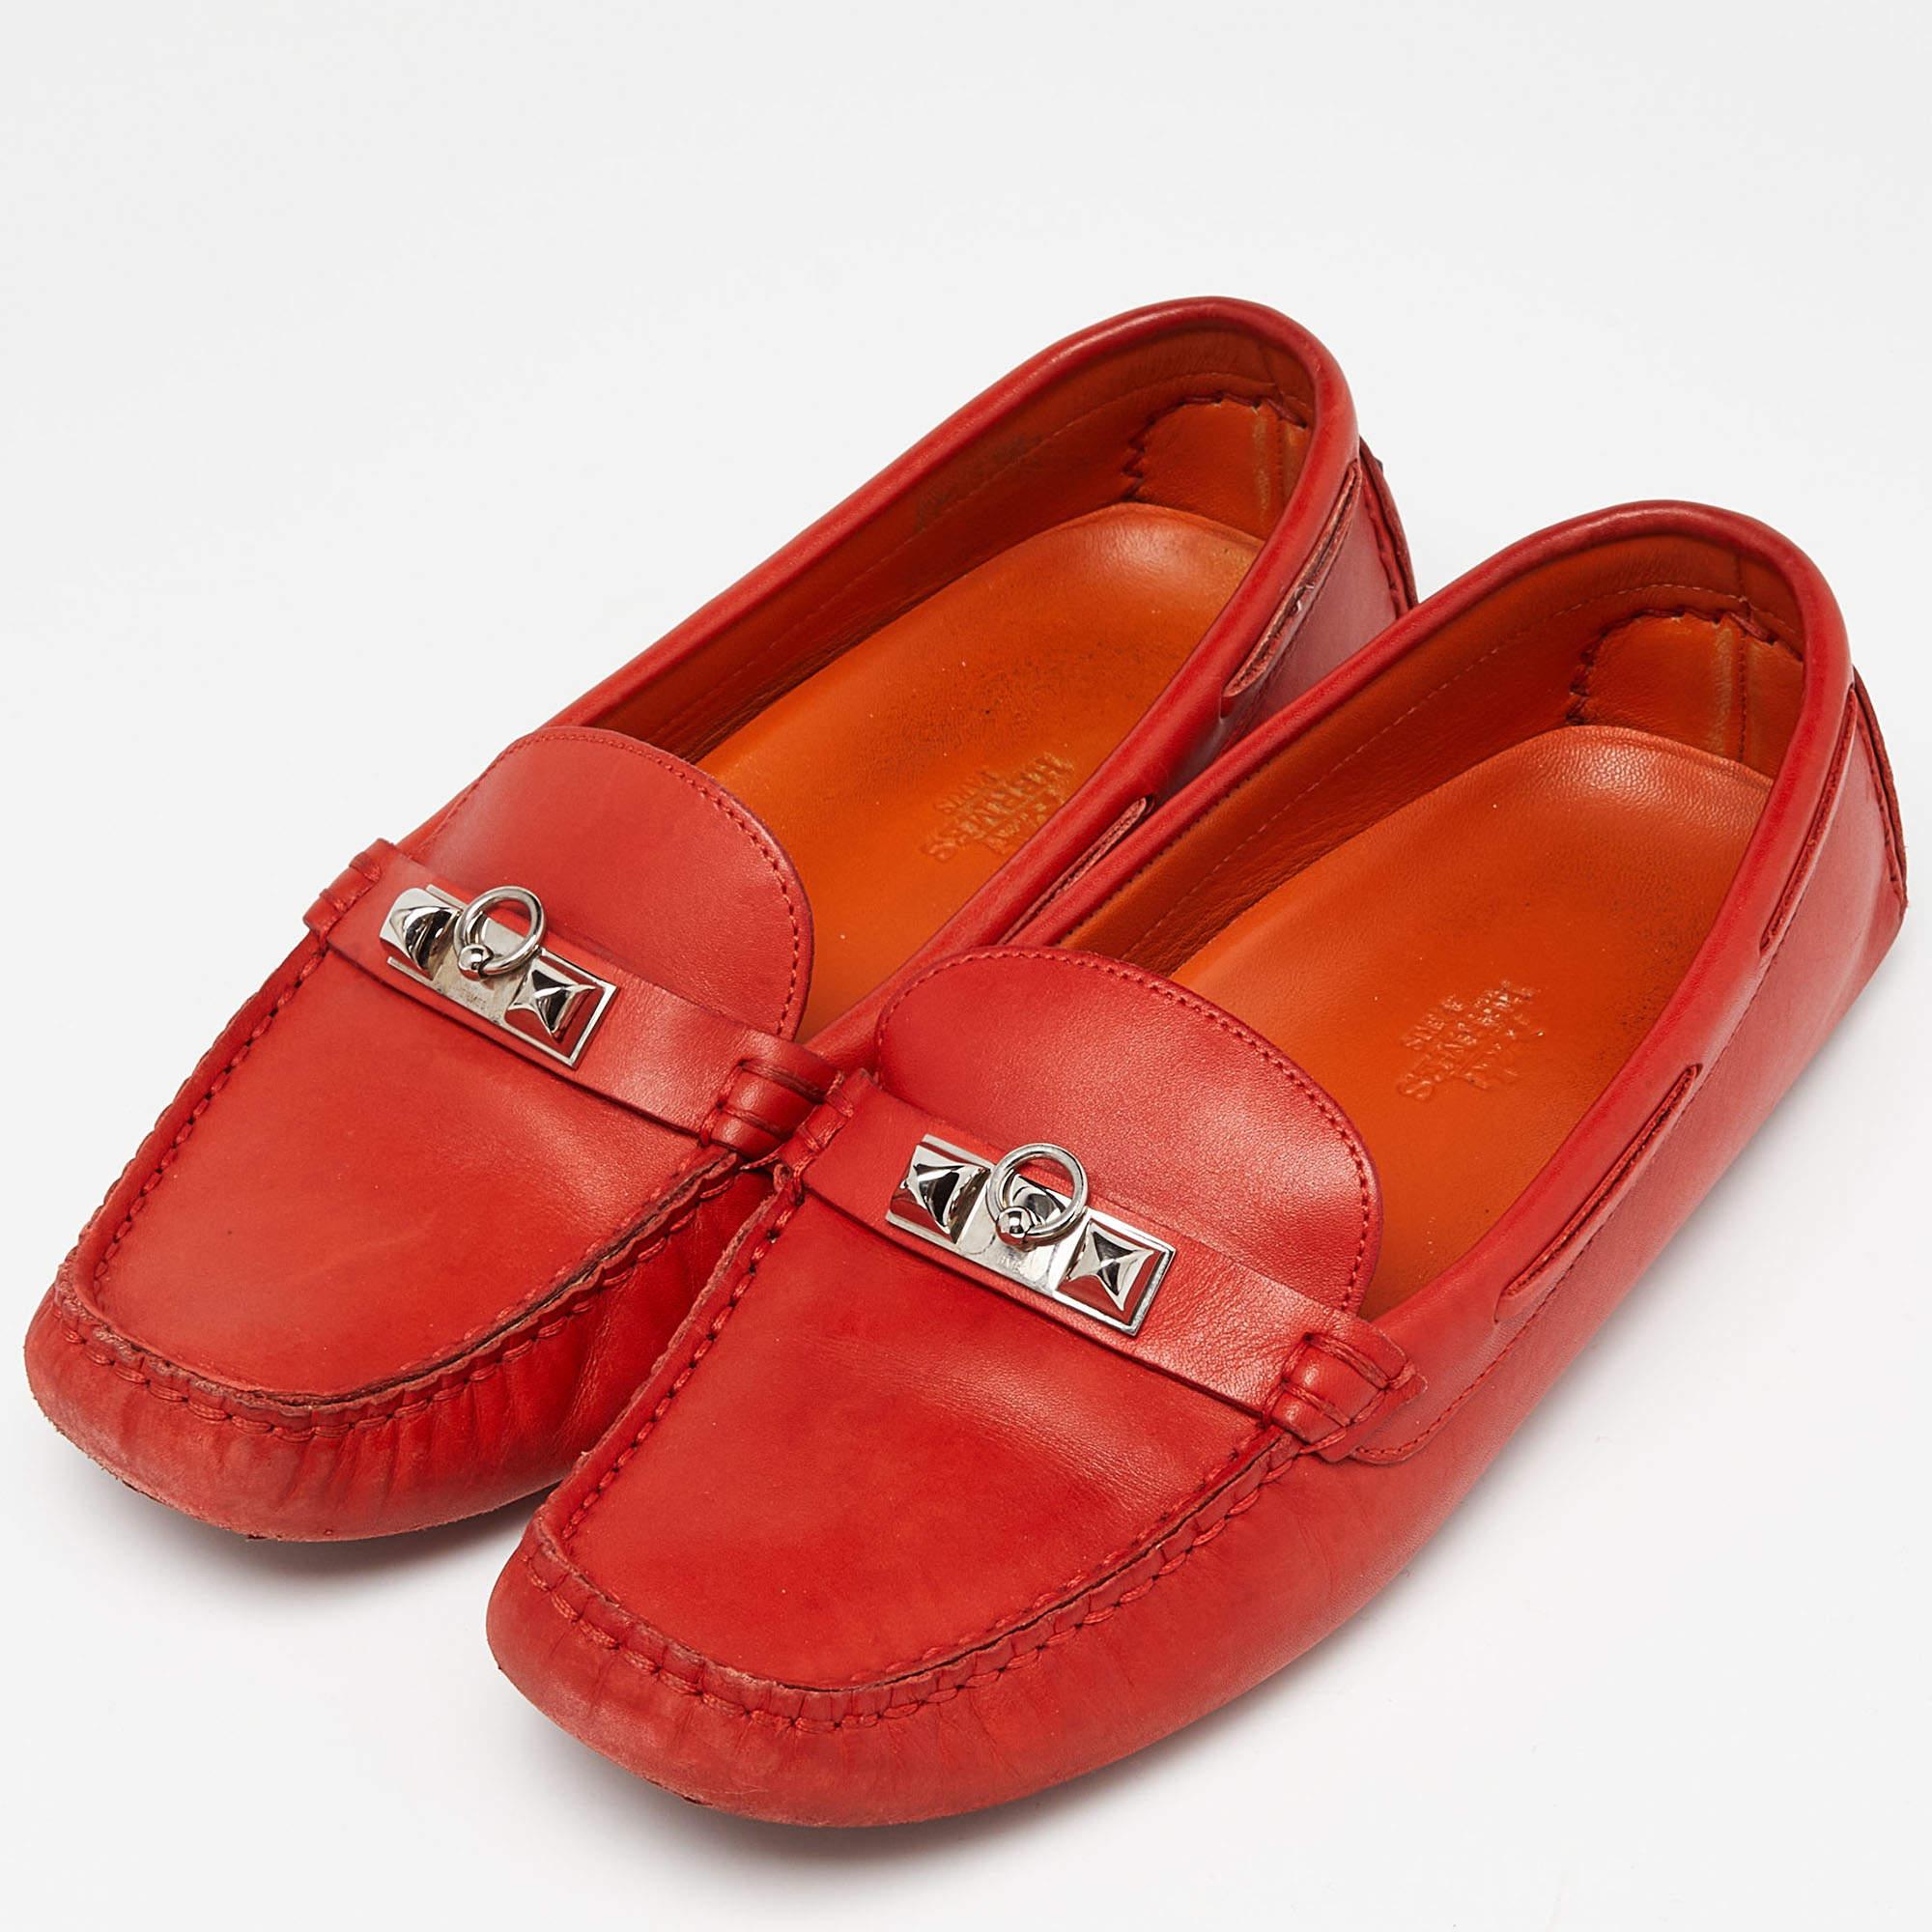 Hermes Orange Leather Irving Loafers Size 37 In Good Condition For Sale In Dubai, Al Qouz 2